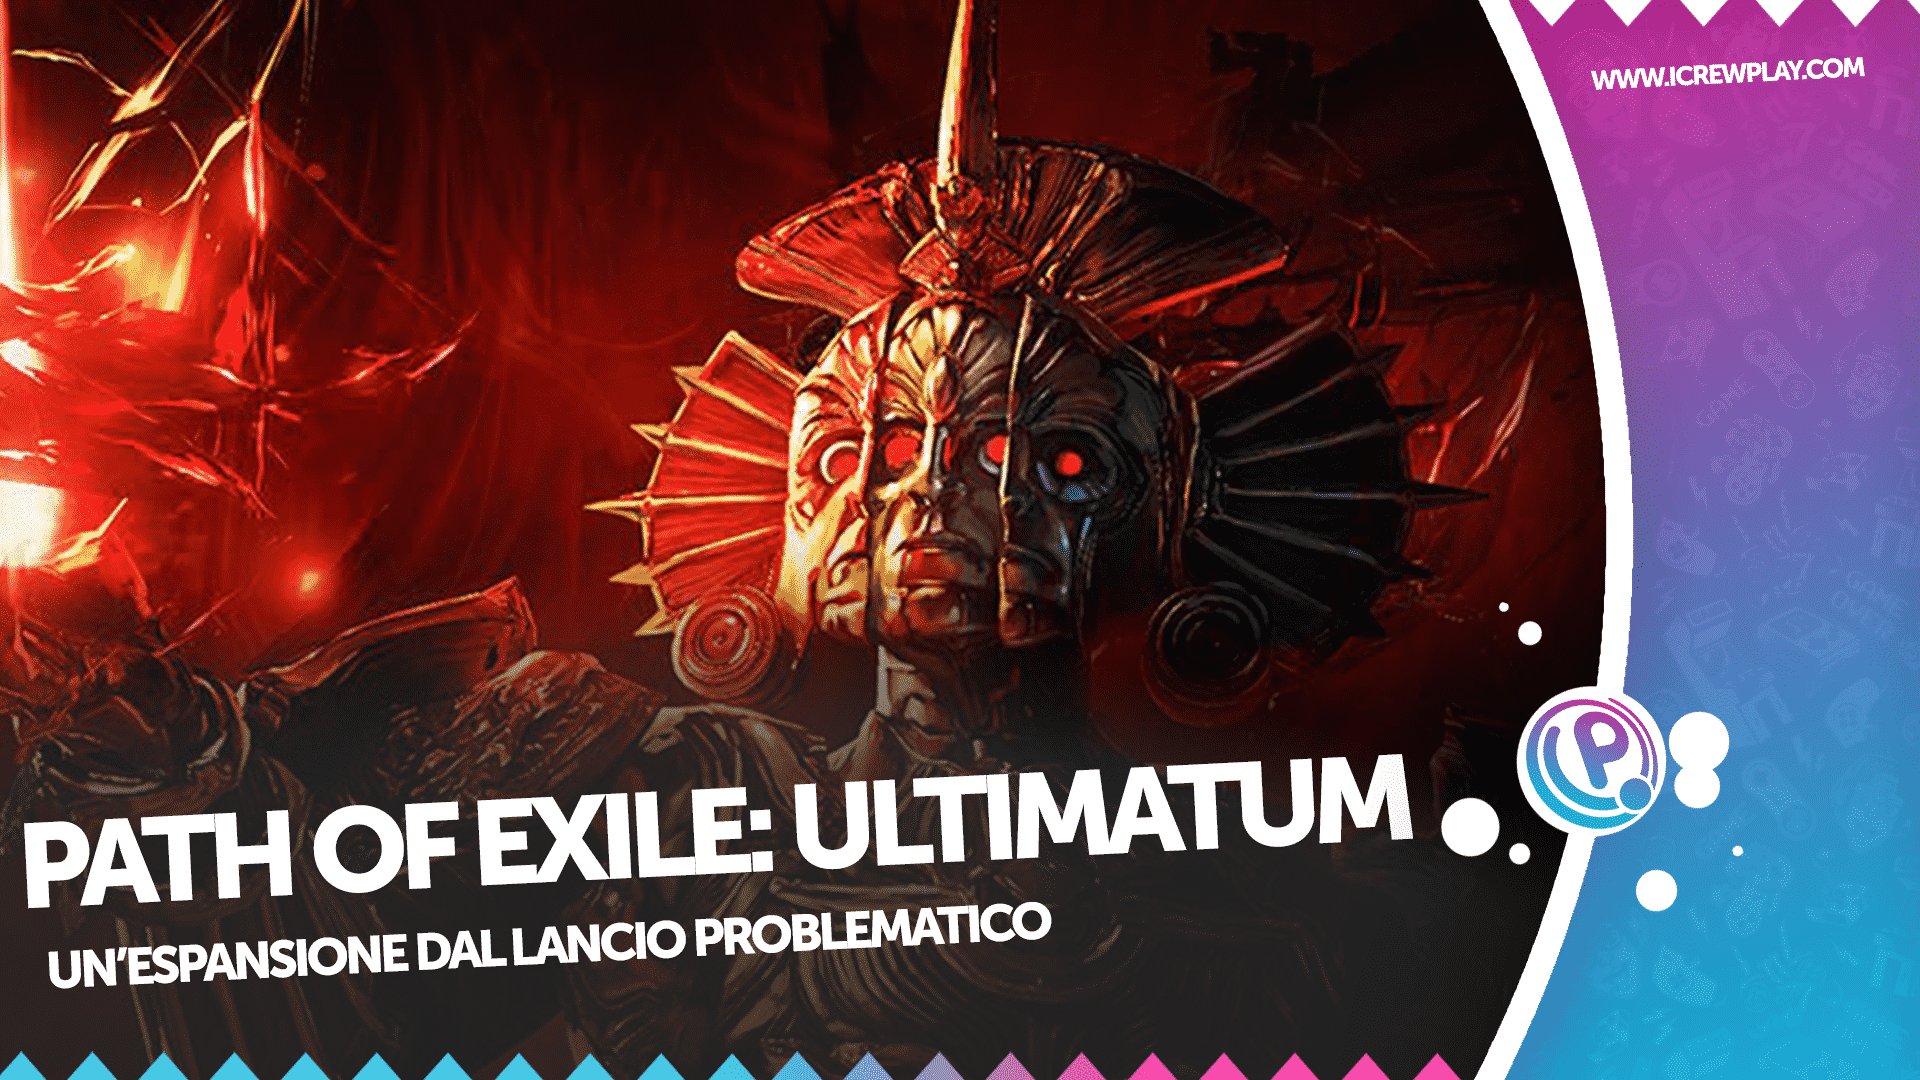 Path of Exile, Path of Exile: Ultimatum, Path of Exile Trailer, Path of Exile Gameplay, Path of Exile Update